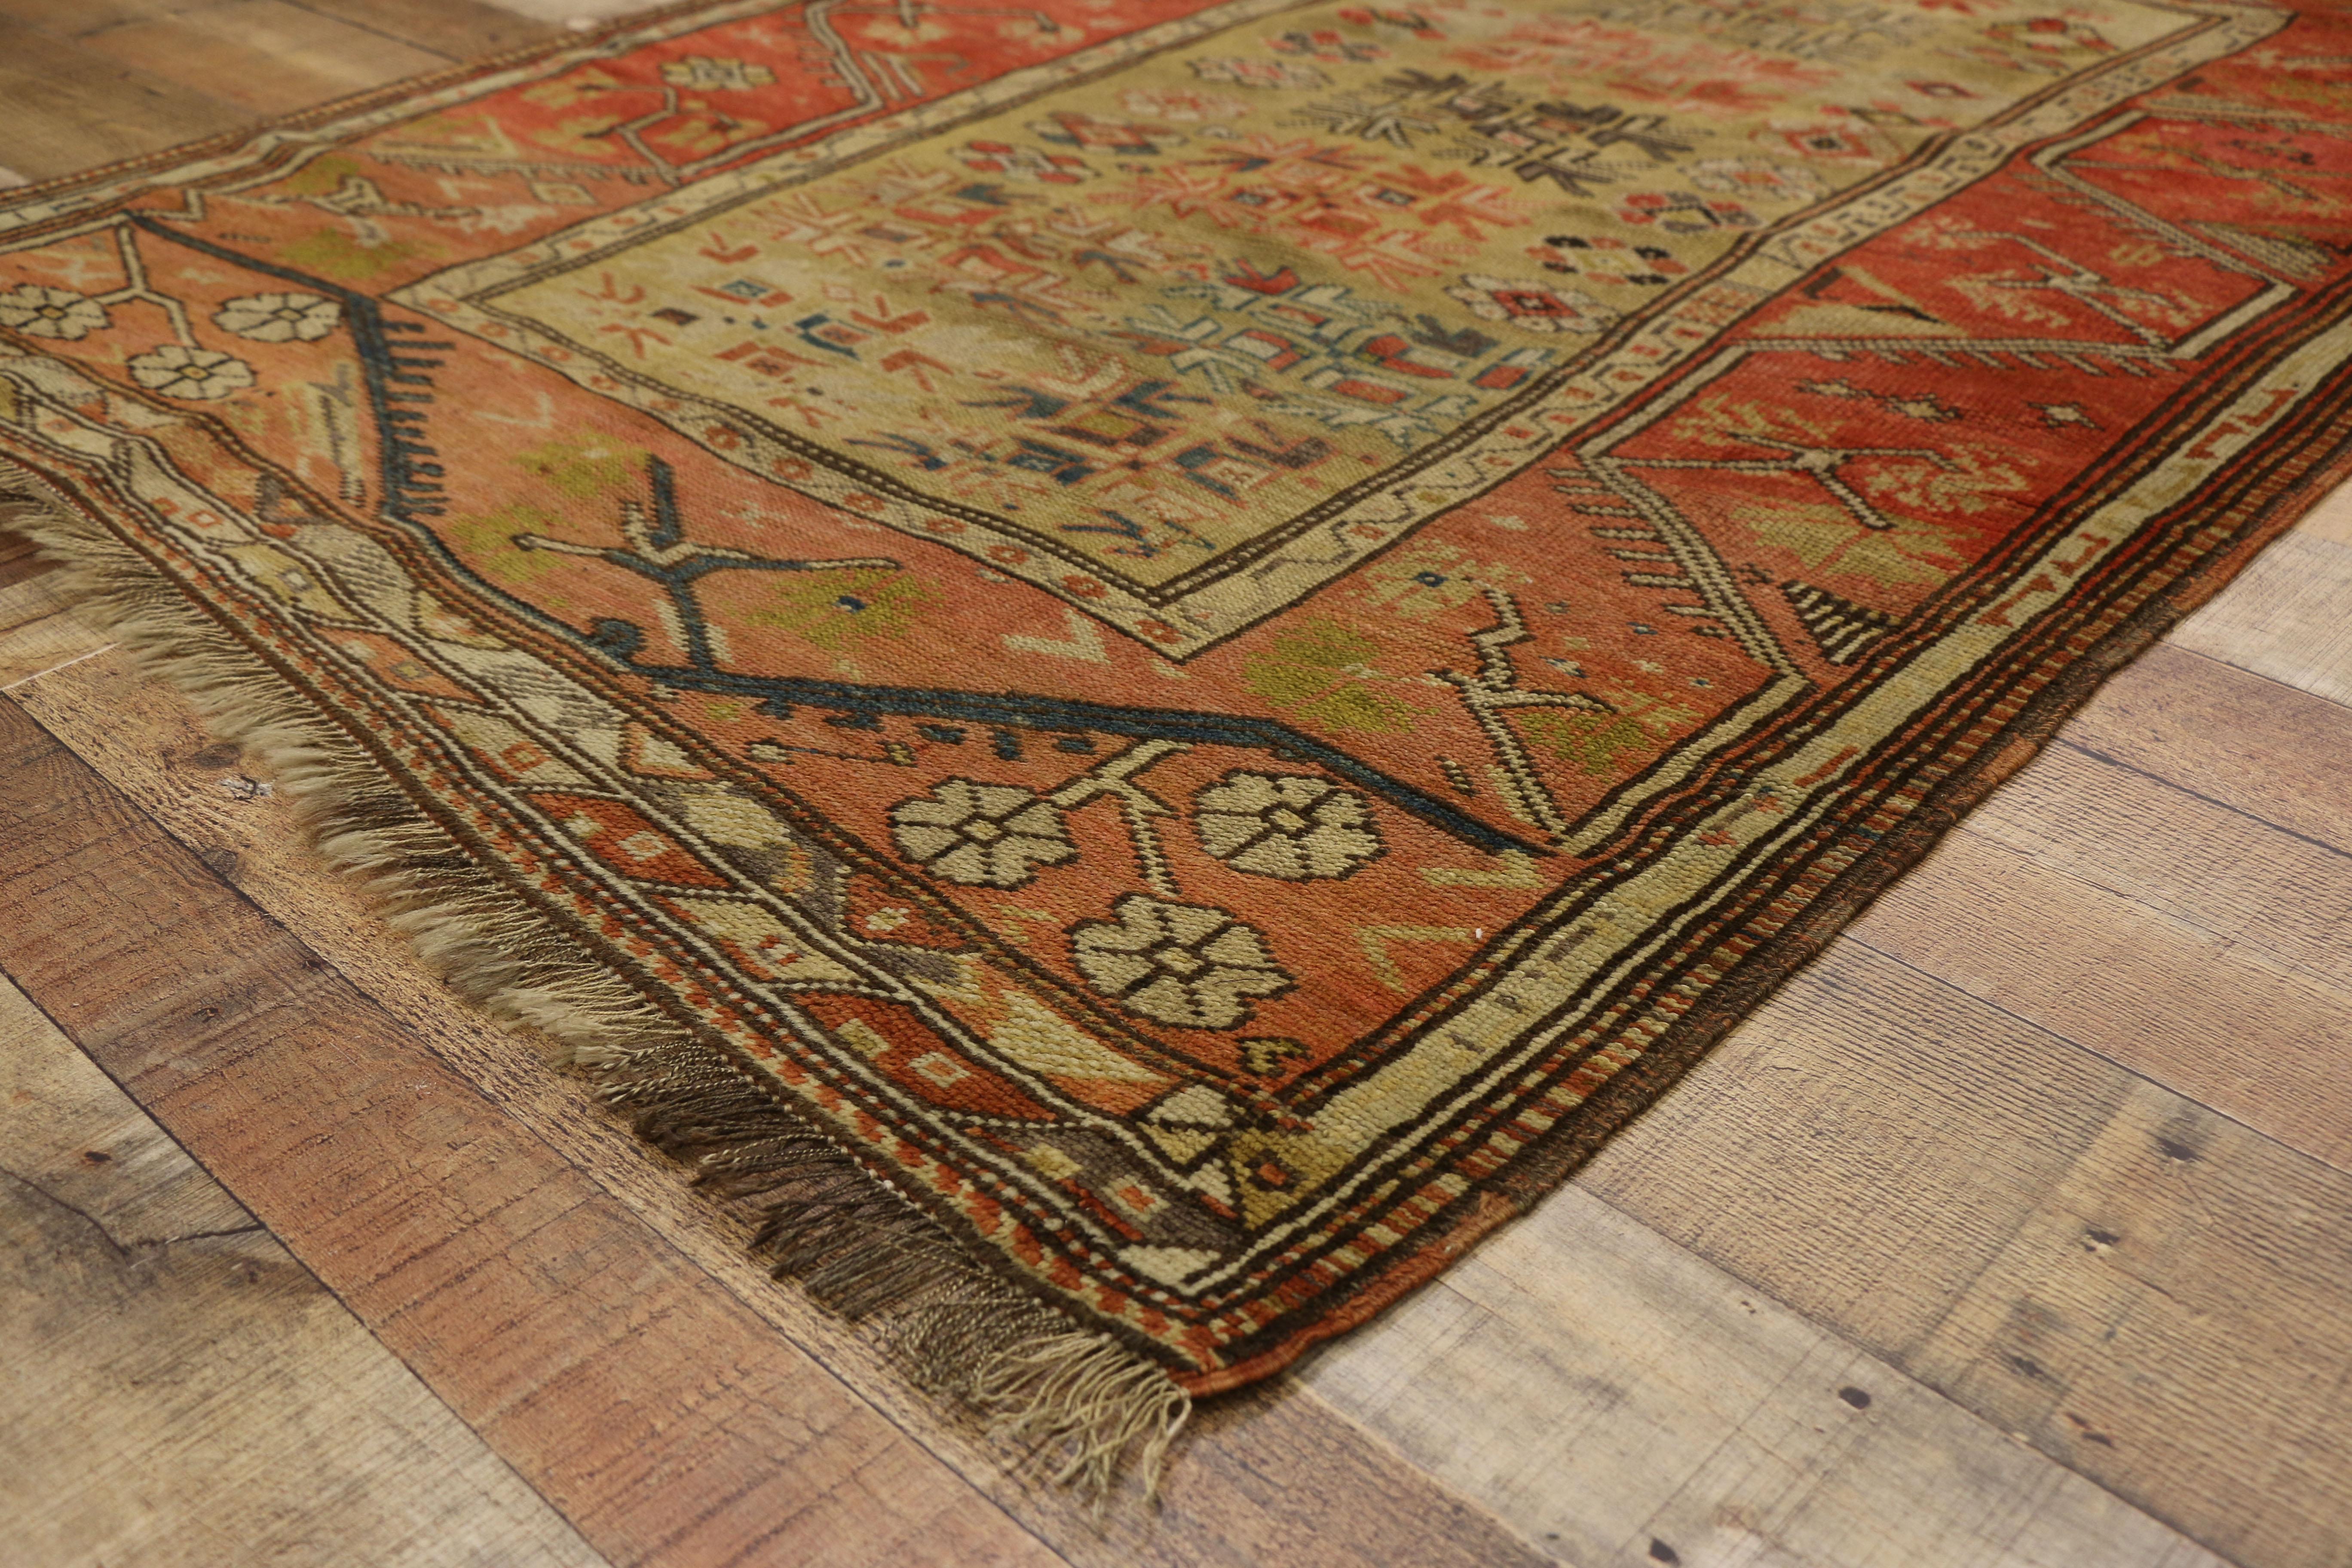 19th Century Distressed Antique Turkish Oushak Accent Rug with Rustic Arts & Crafts Style